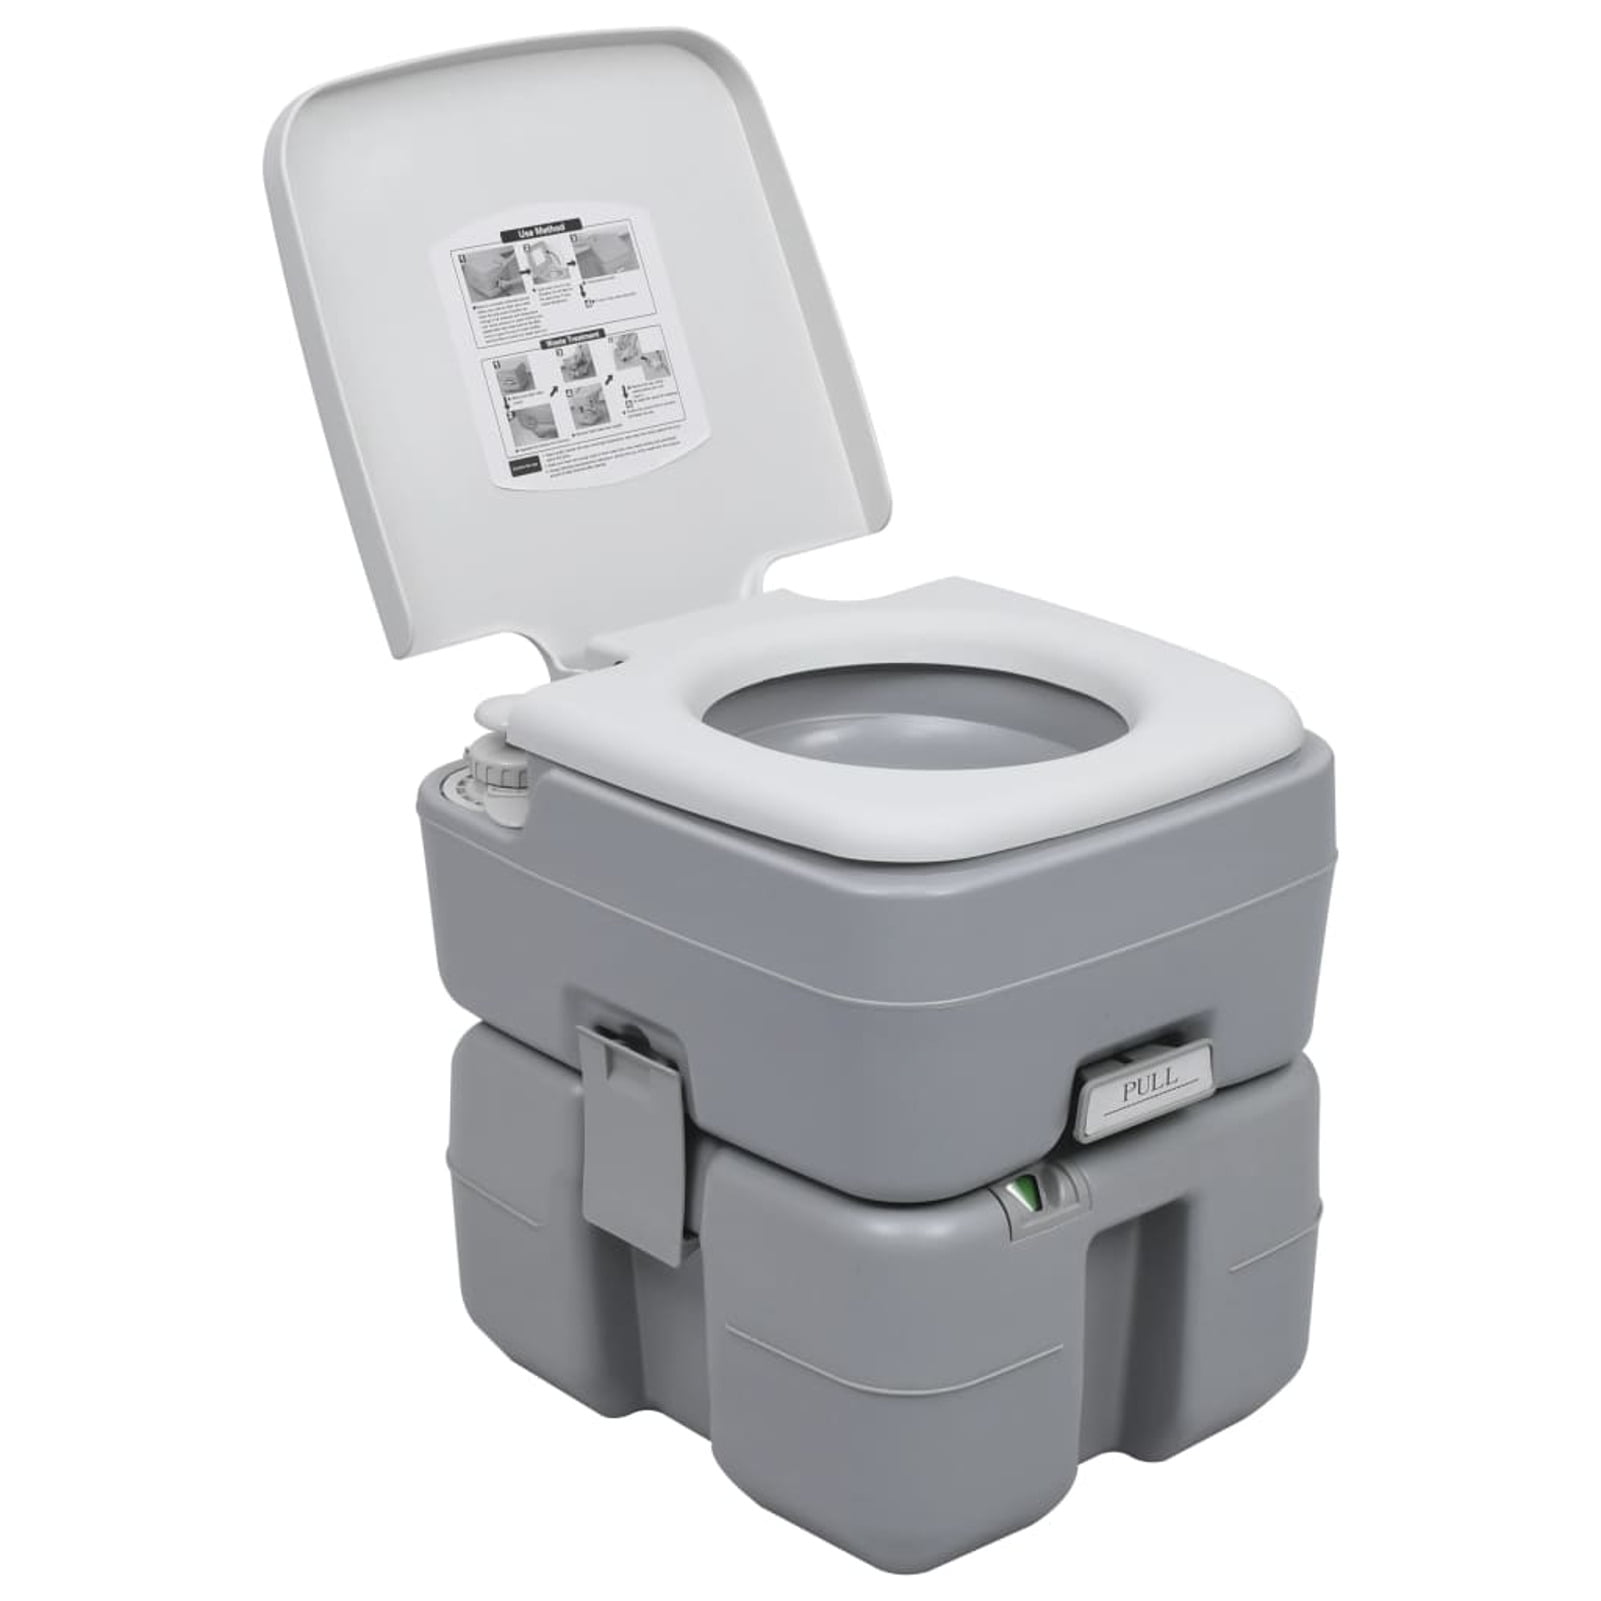 Details about   20L Portable Camping Toilet Flush Porta Travel Outdoor Vehicle Boat Toilet Potty 